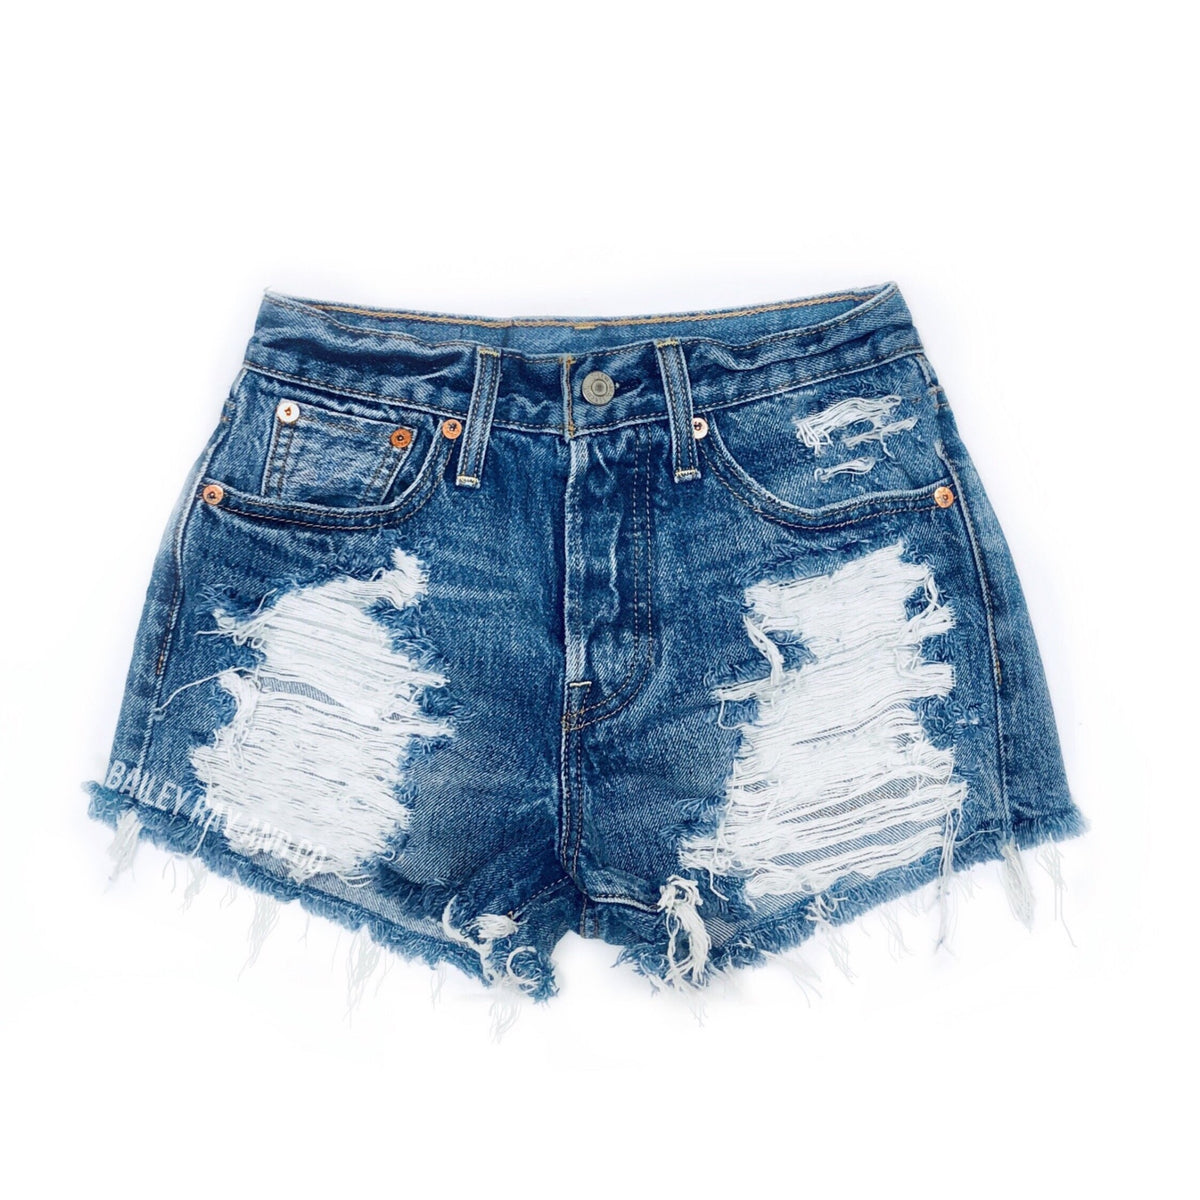 Vintage, High Waisted Levi Shorts - Destroyed | Bailey Ray and Co.